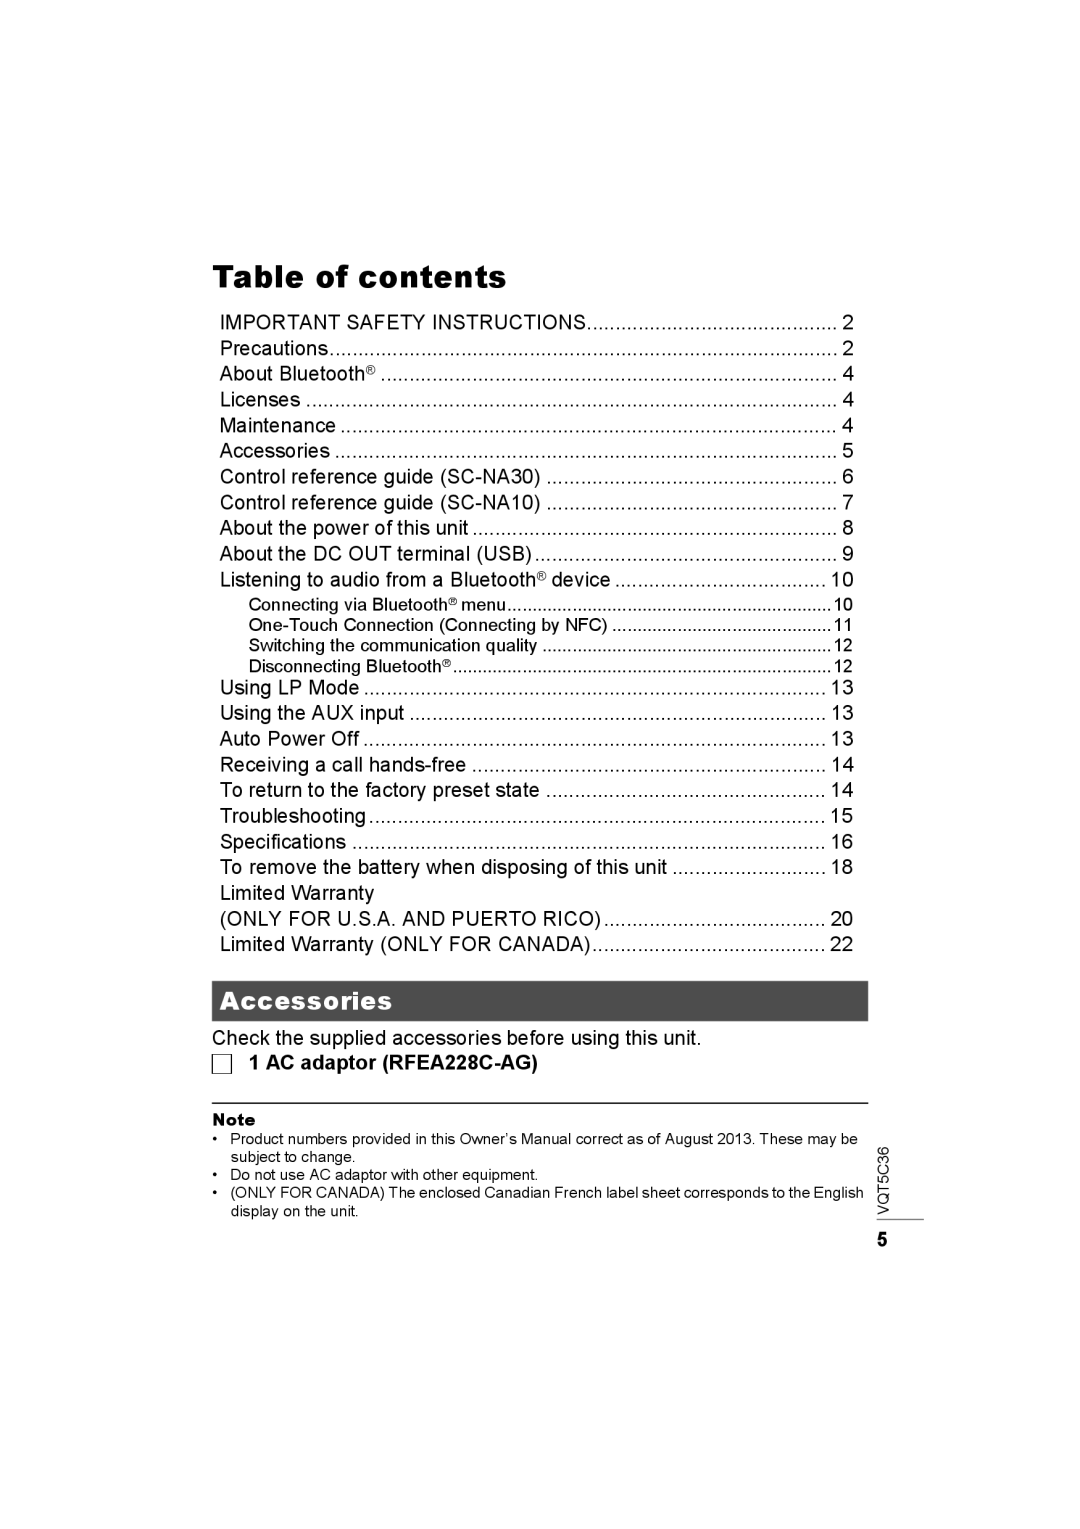 Panasonic SC-NA30 owner manual Accessories, ∏1 AC adaptor RFEA228C-AG, Table of contents 